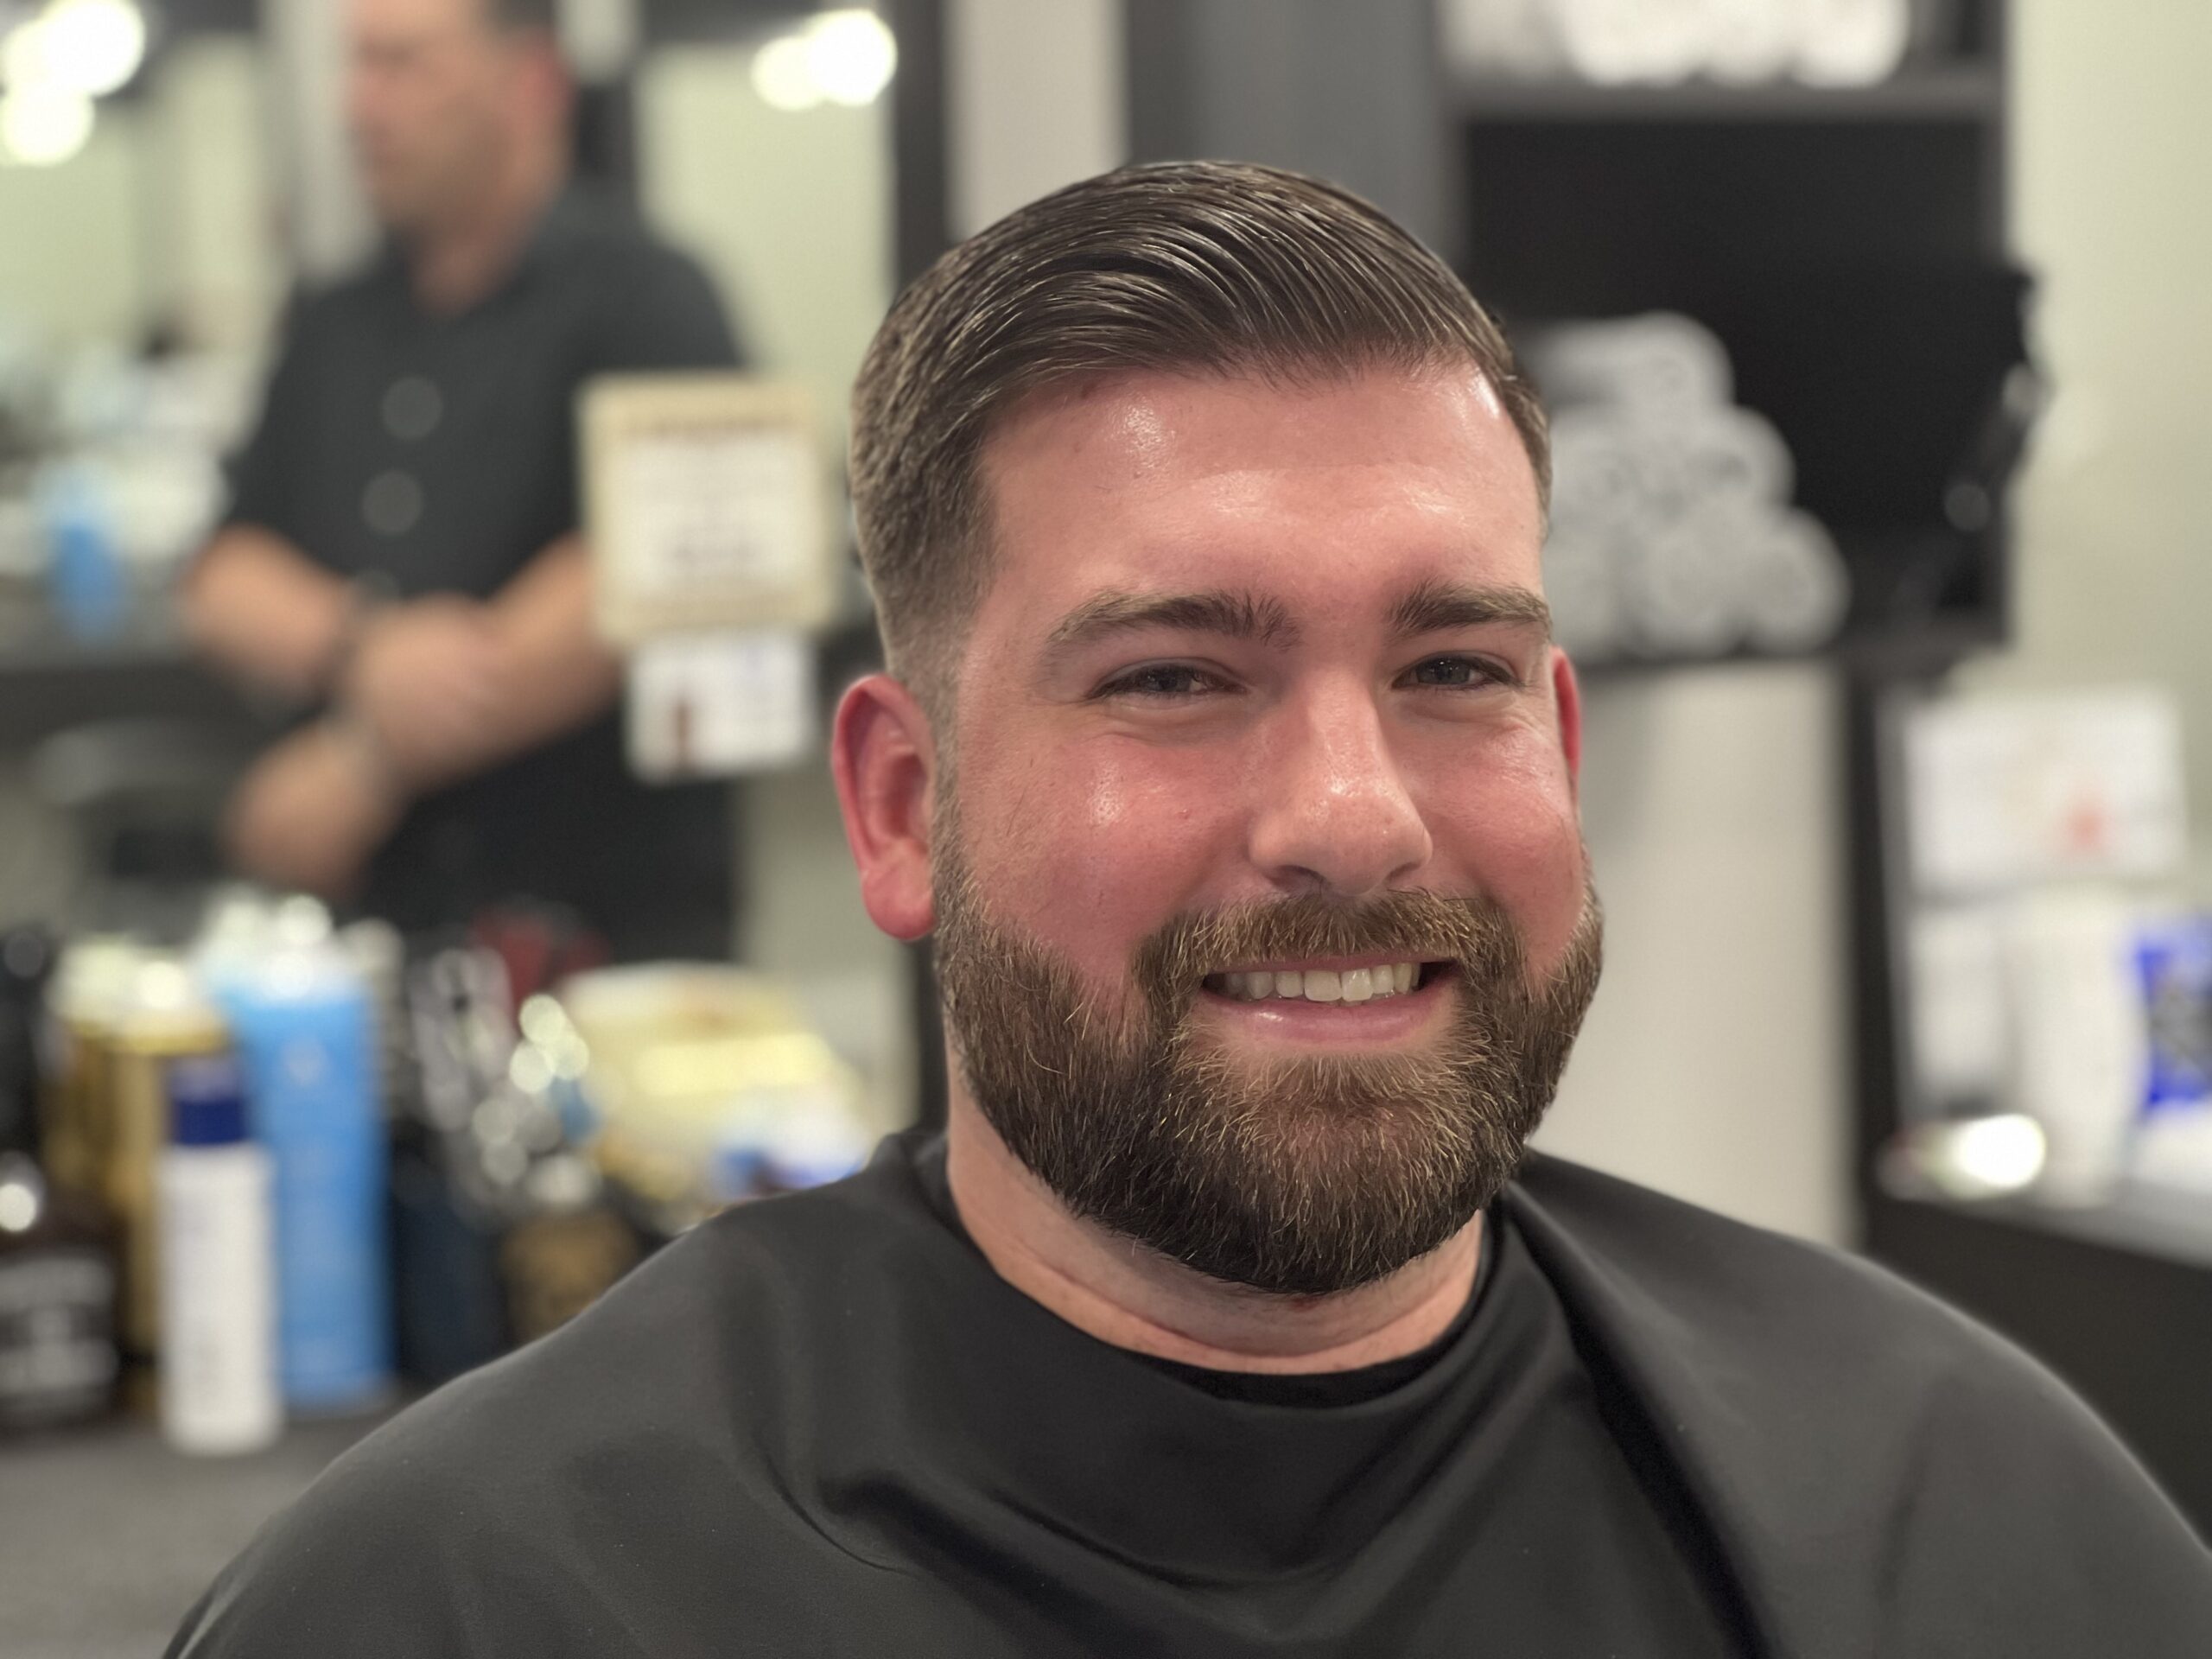 Man smiling after getting his hair cut